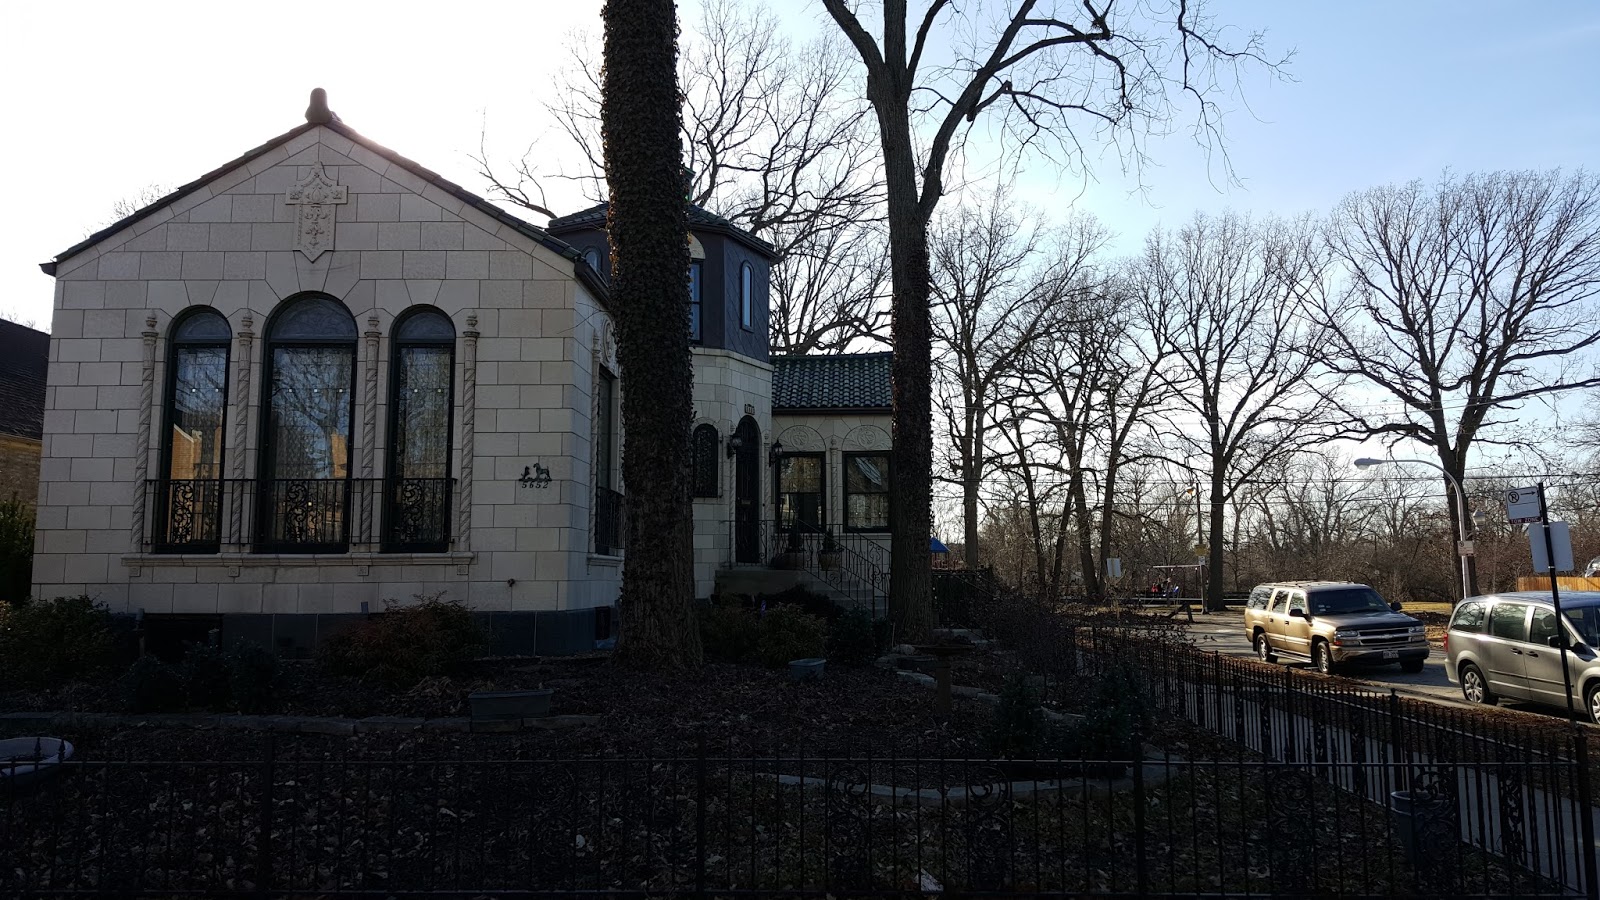 The Chicago Real Estate Local: Home sales along Legion Park in Lincoln Square, West Ridge